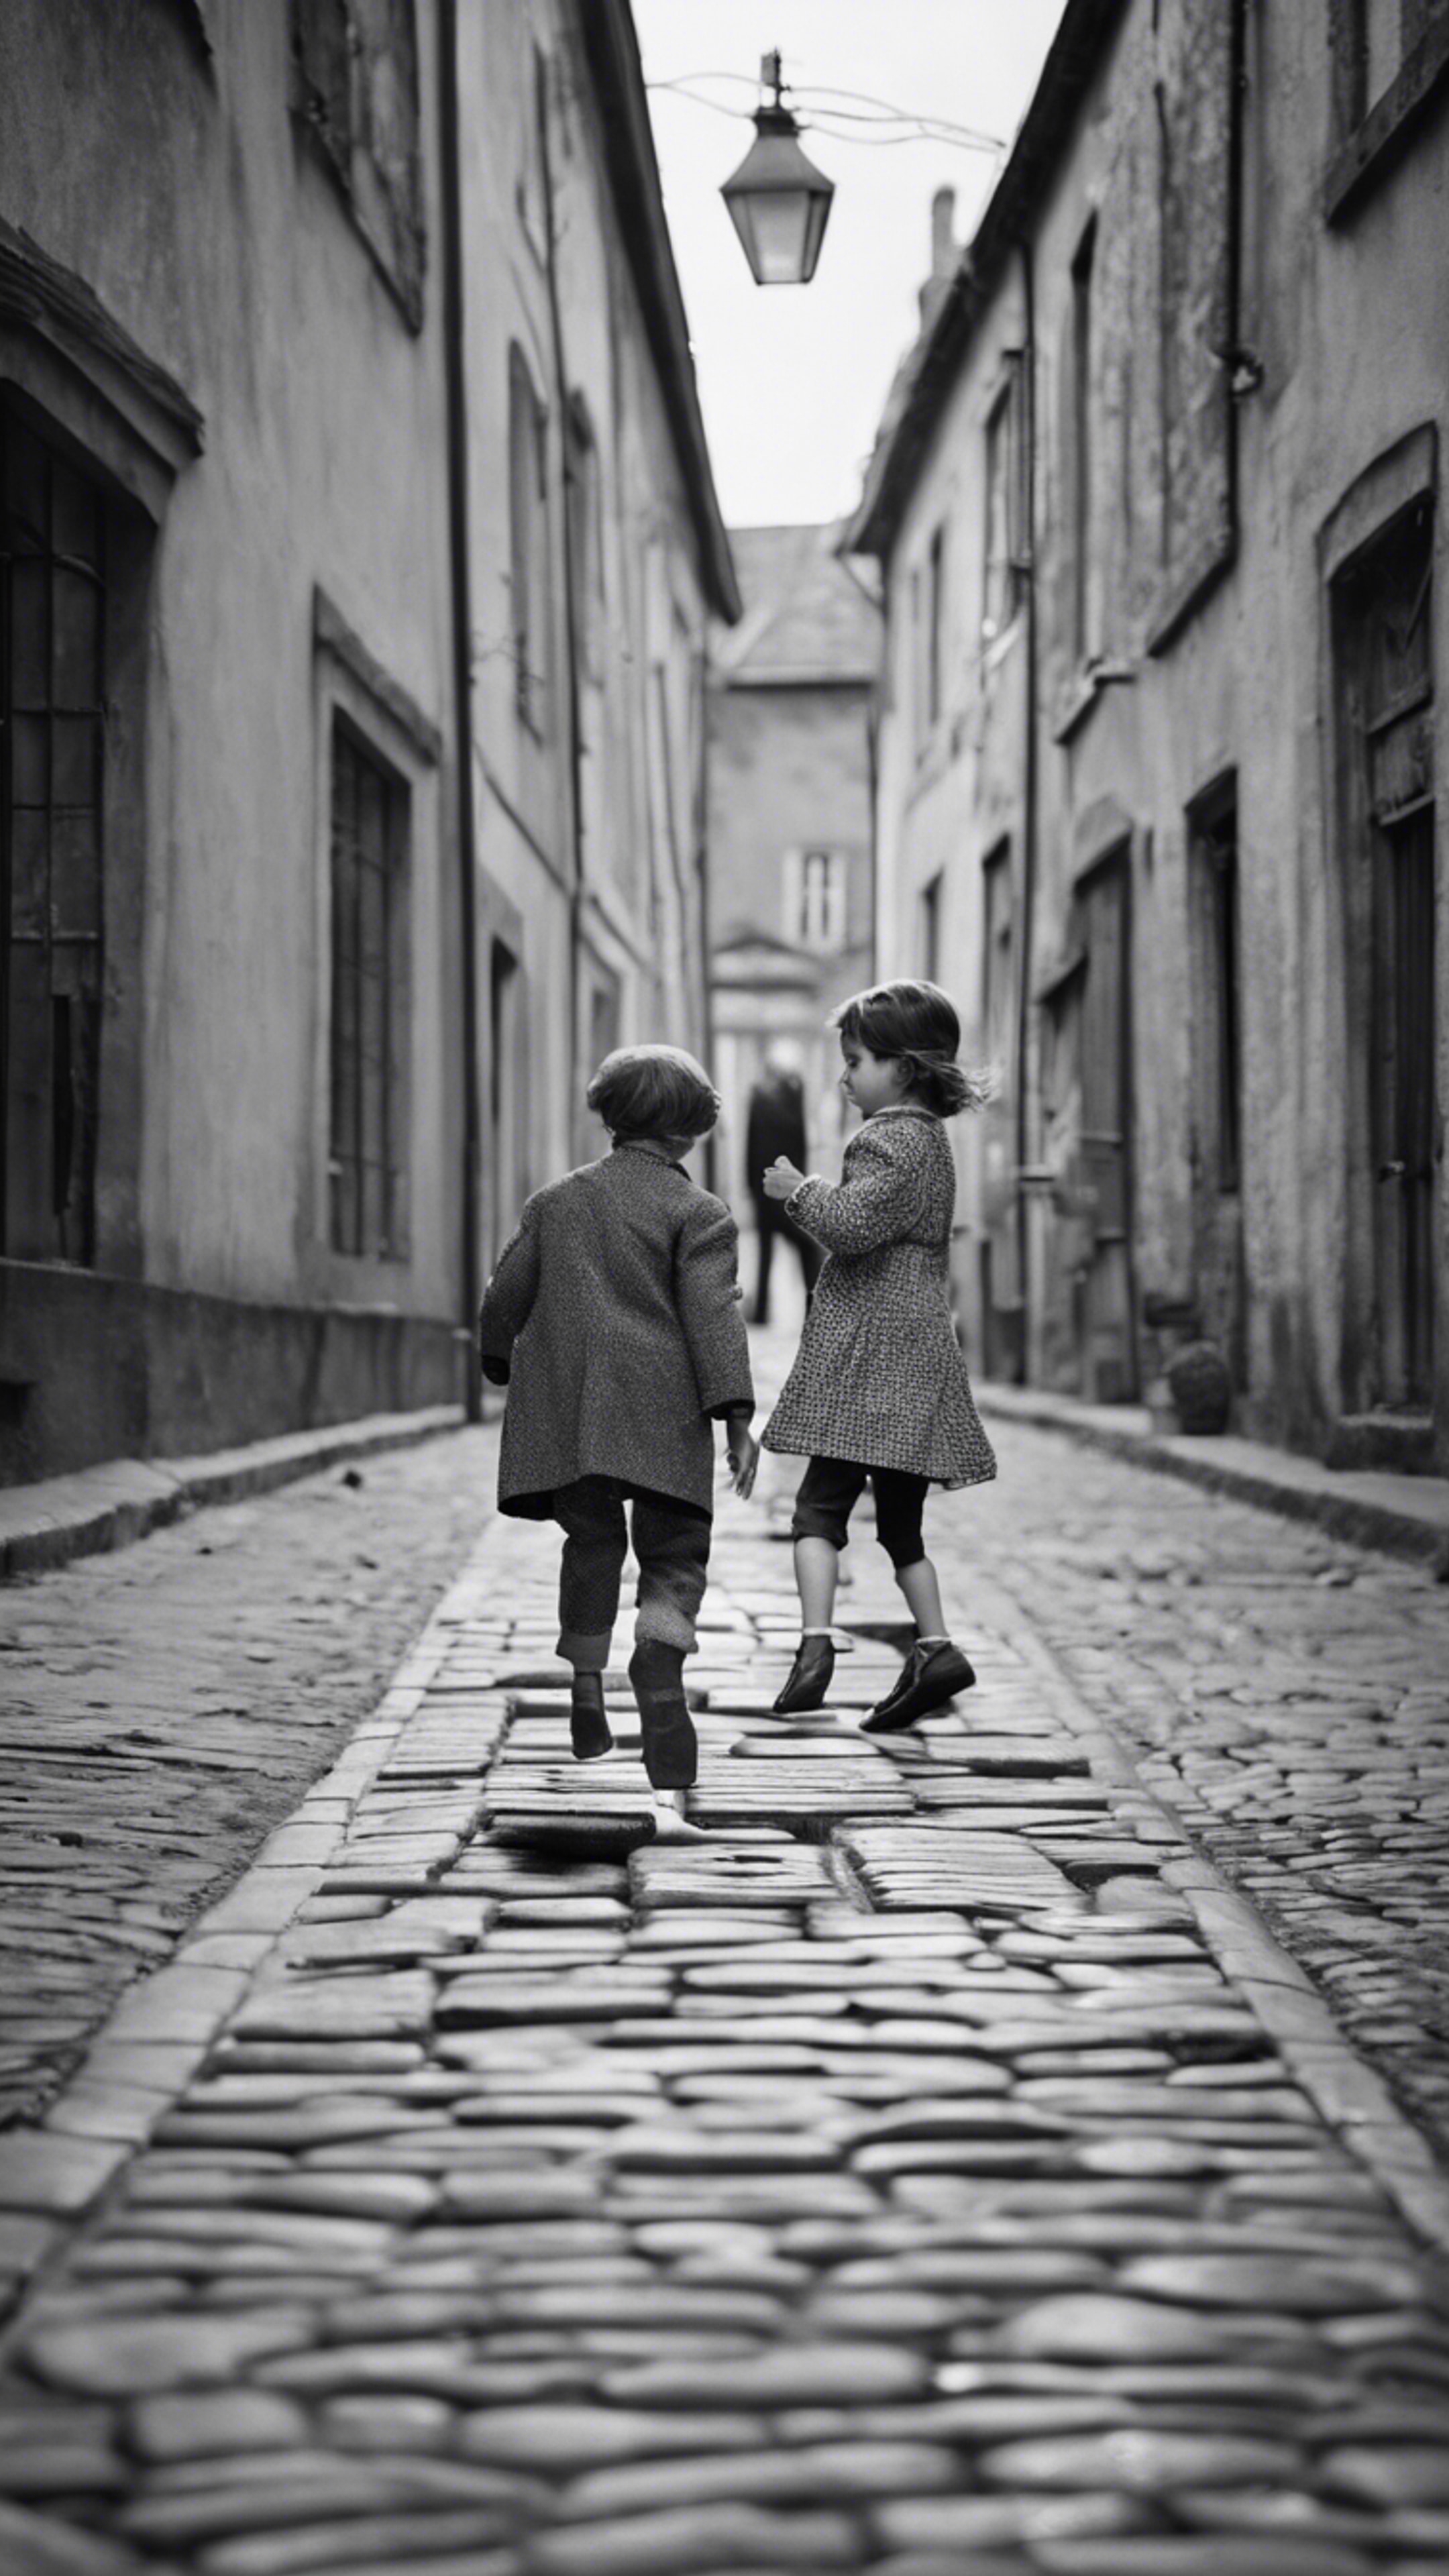 A black-and-white picture of children playing hopscotch on a cobbled street. The scene is bustling with vintage clothing and old buildings indicative of 1940s Europe. Wallpaper[4df91ed9803e41c8b6d7]